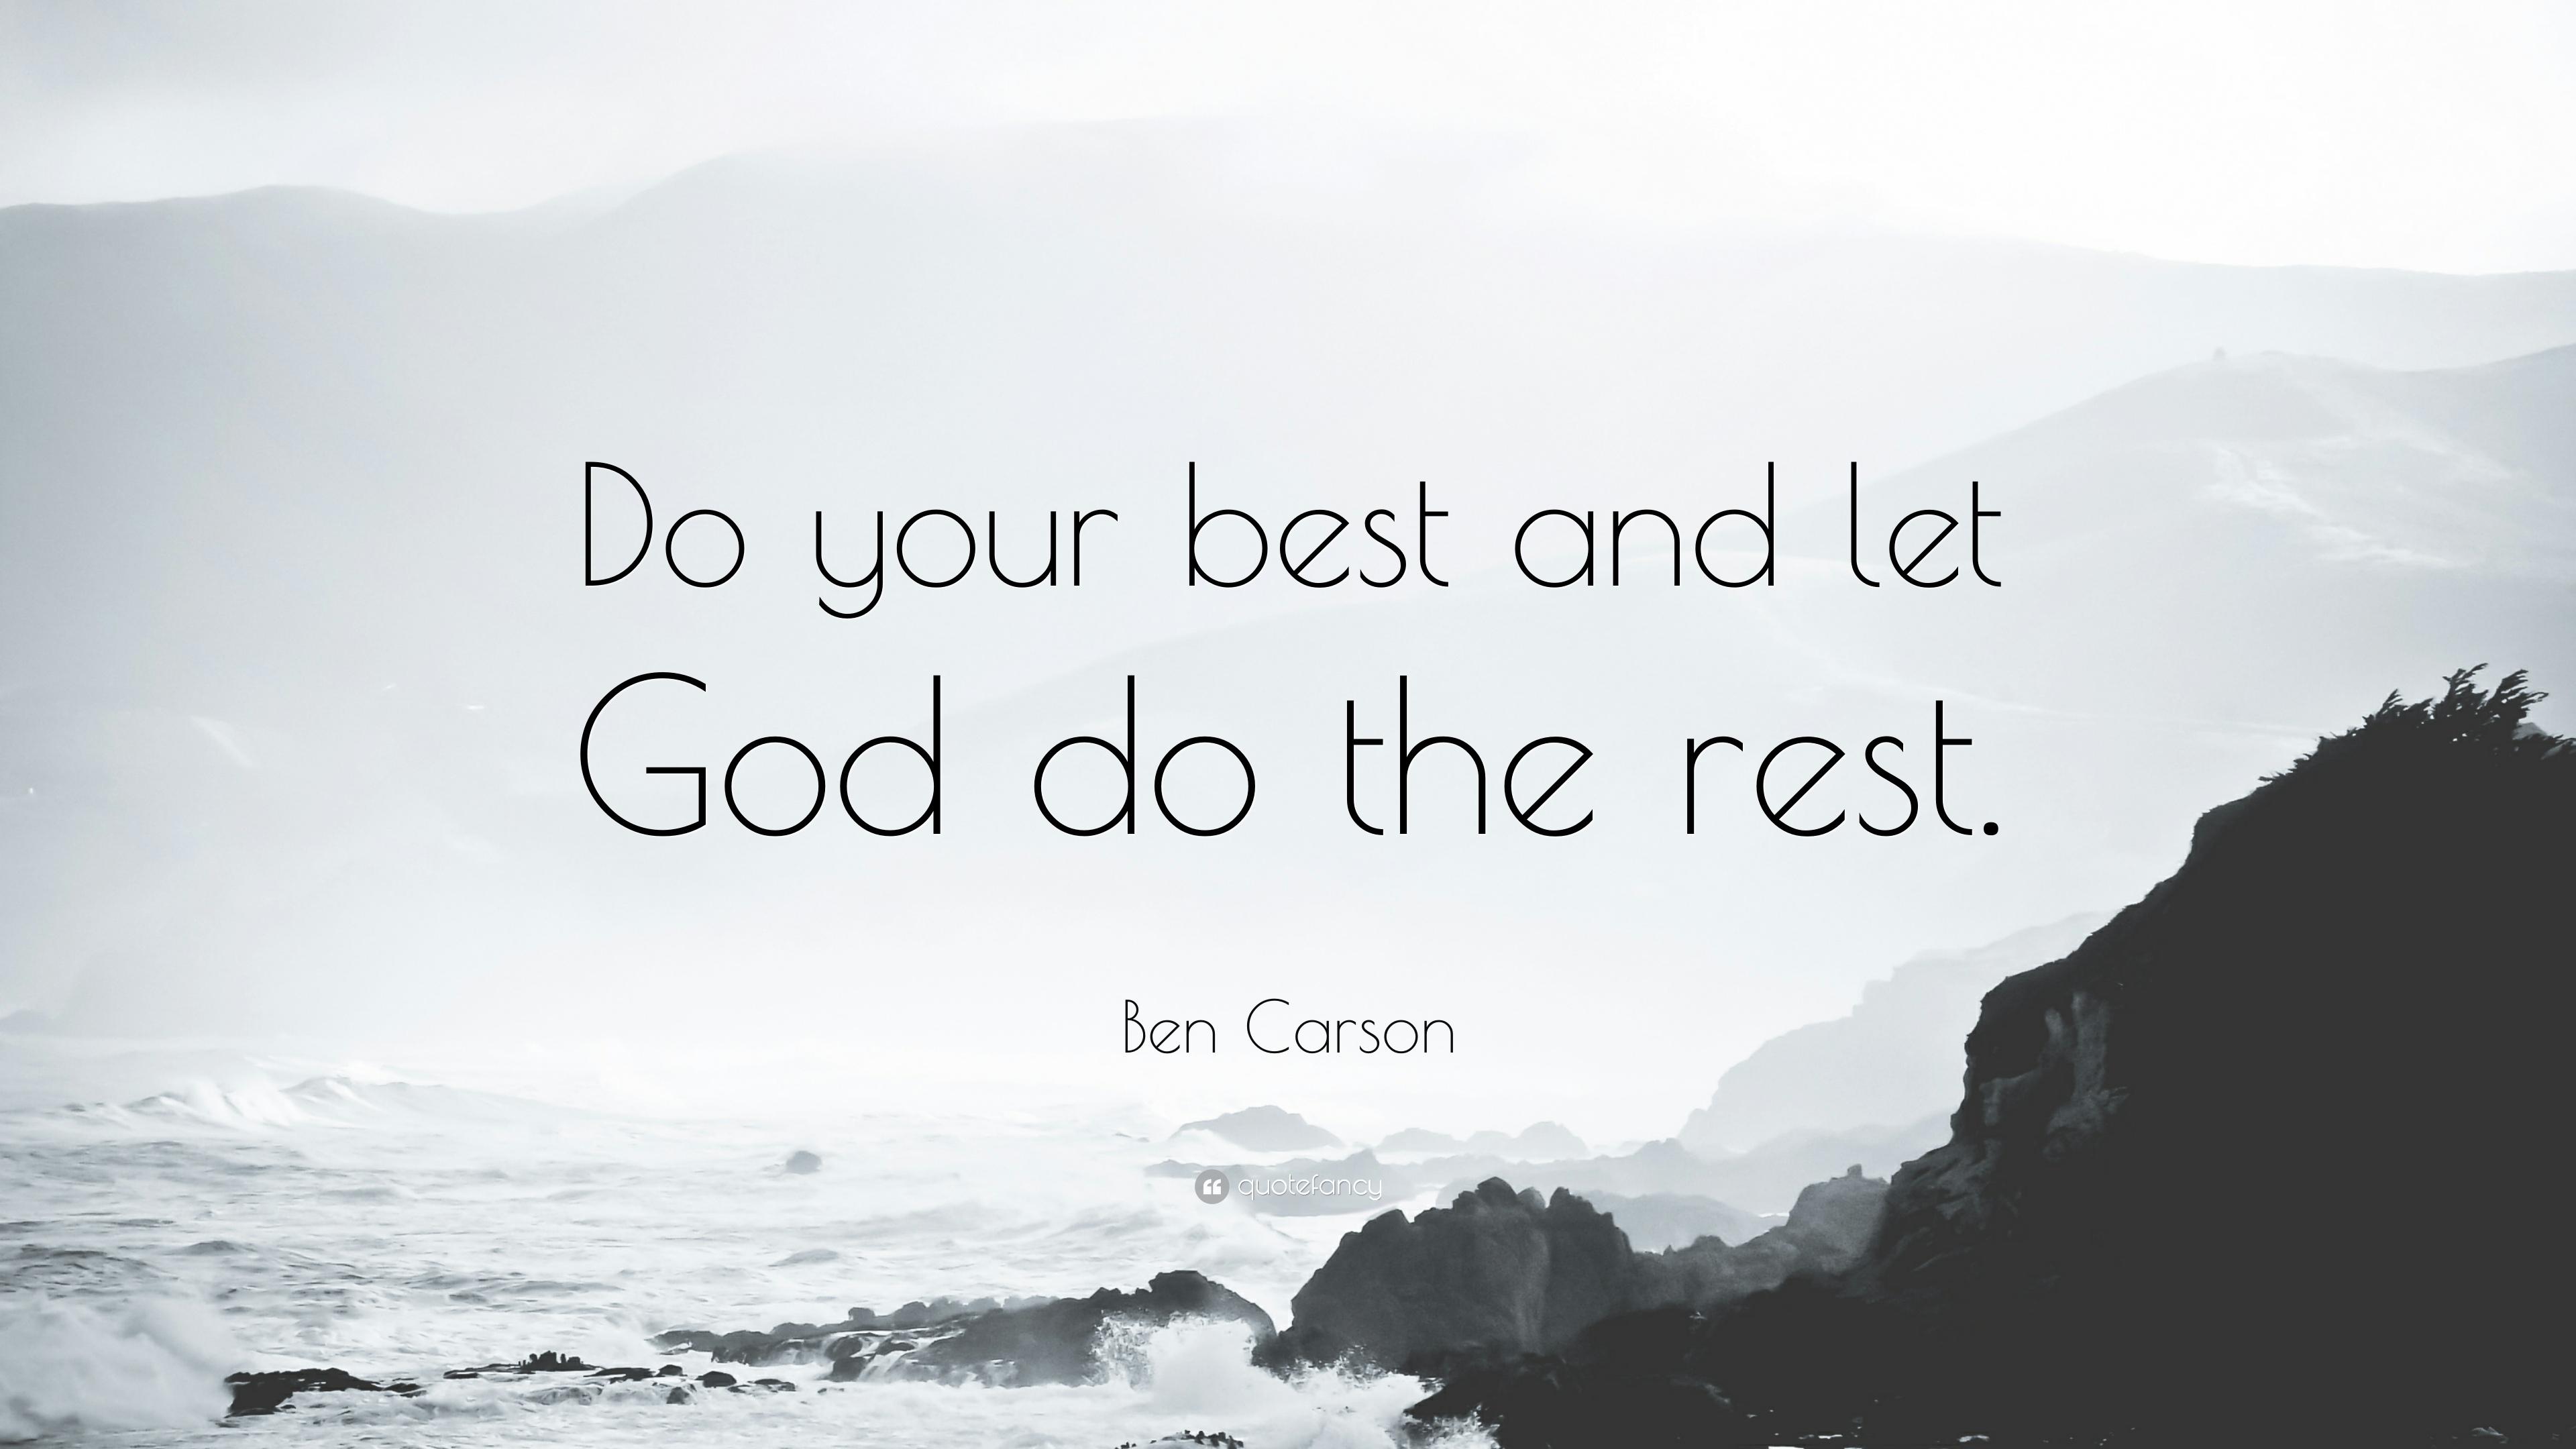 Ben Carson Quote: “Do your best and let God do the rest